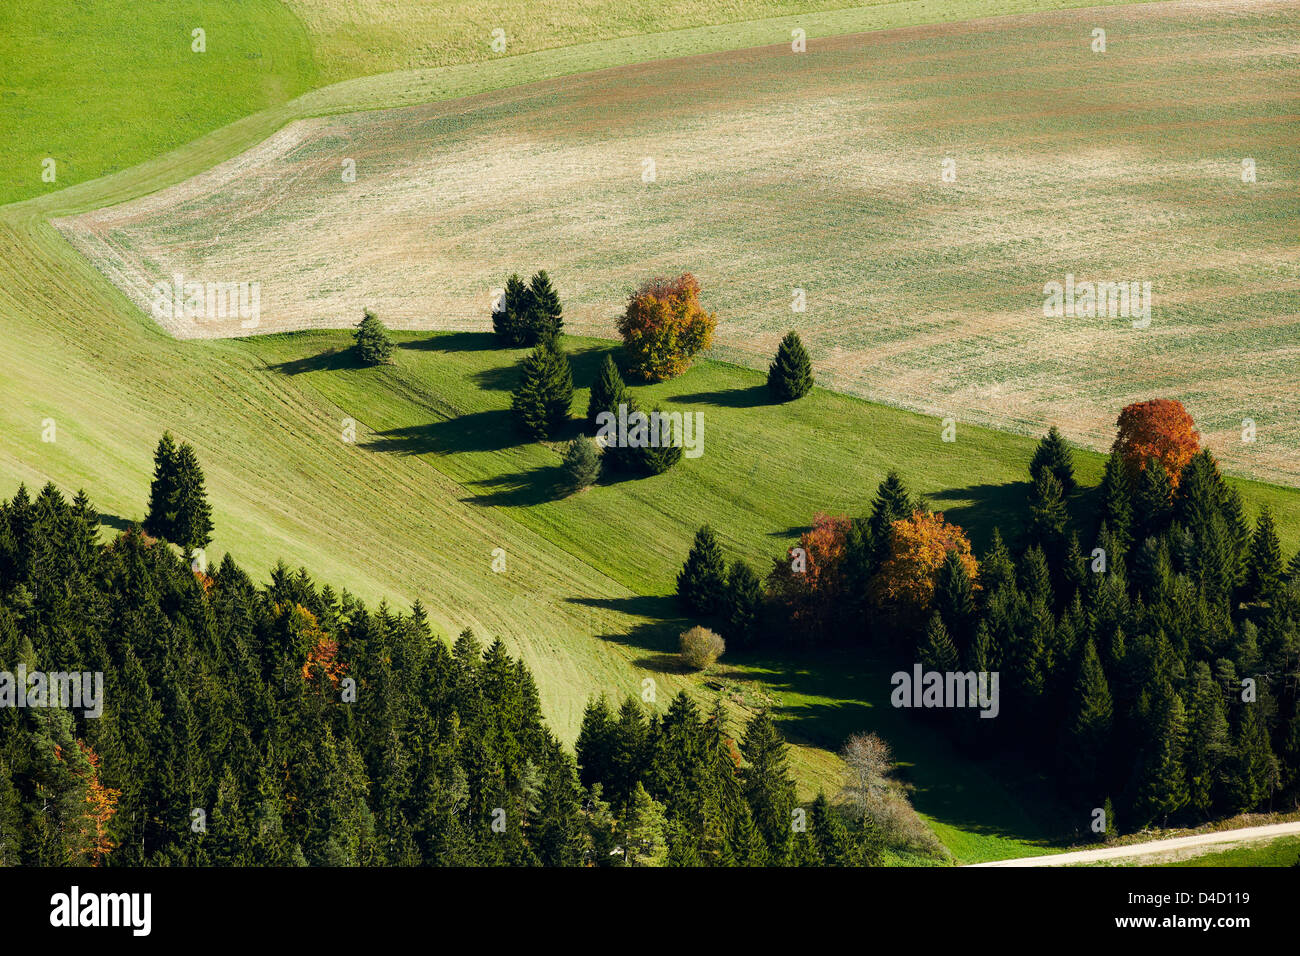 Group of trees at a field, aerial photo Stock Photo